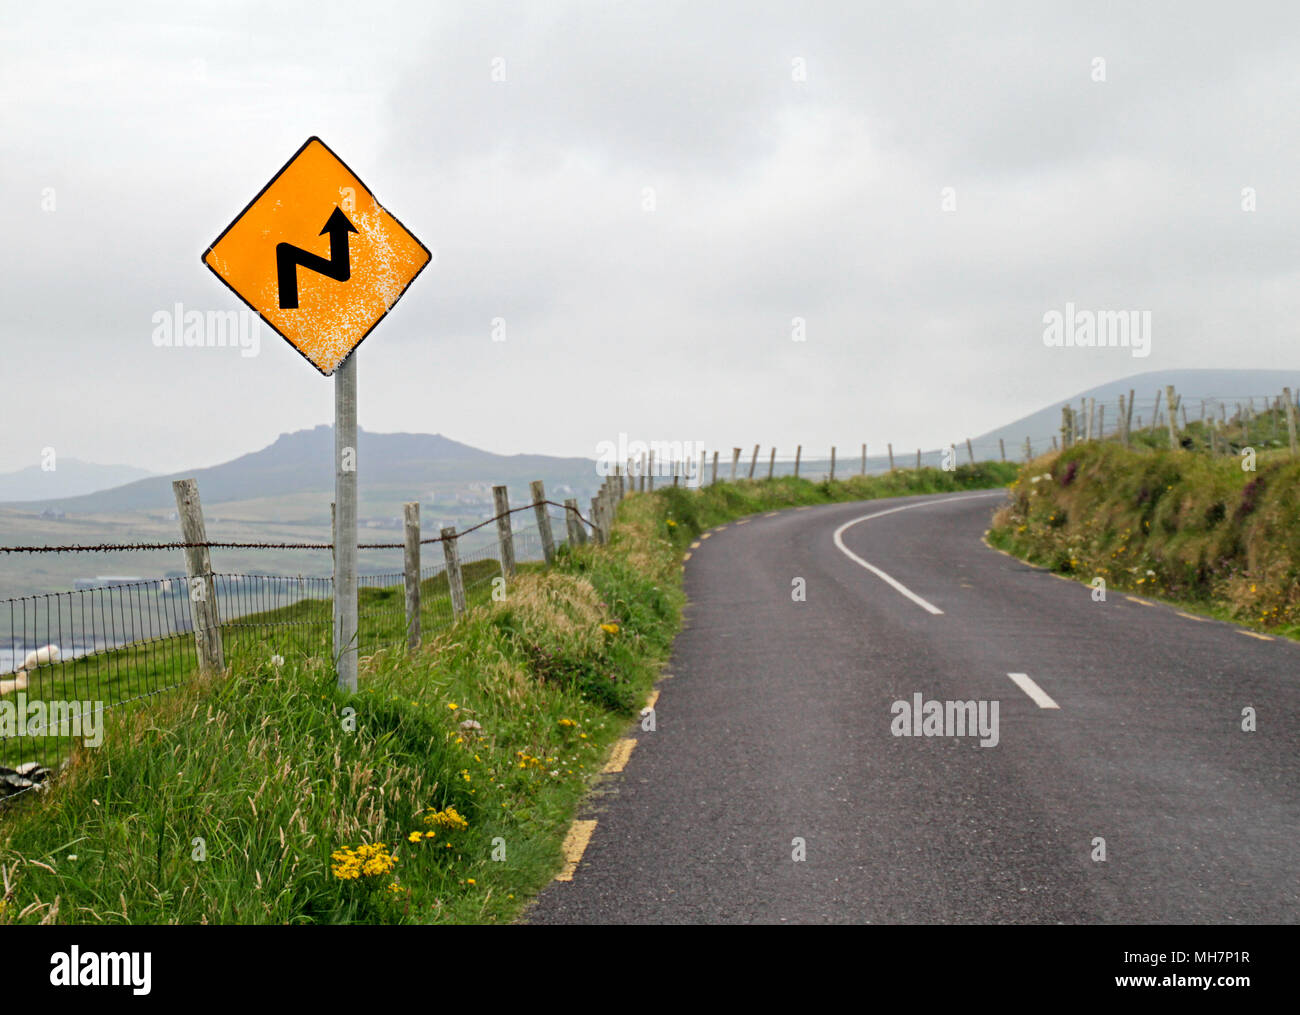 Yellow warning sign - Curve Ahead Stock Photo